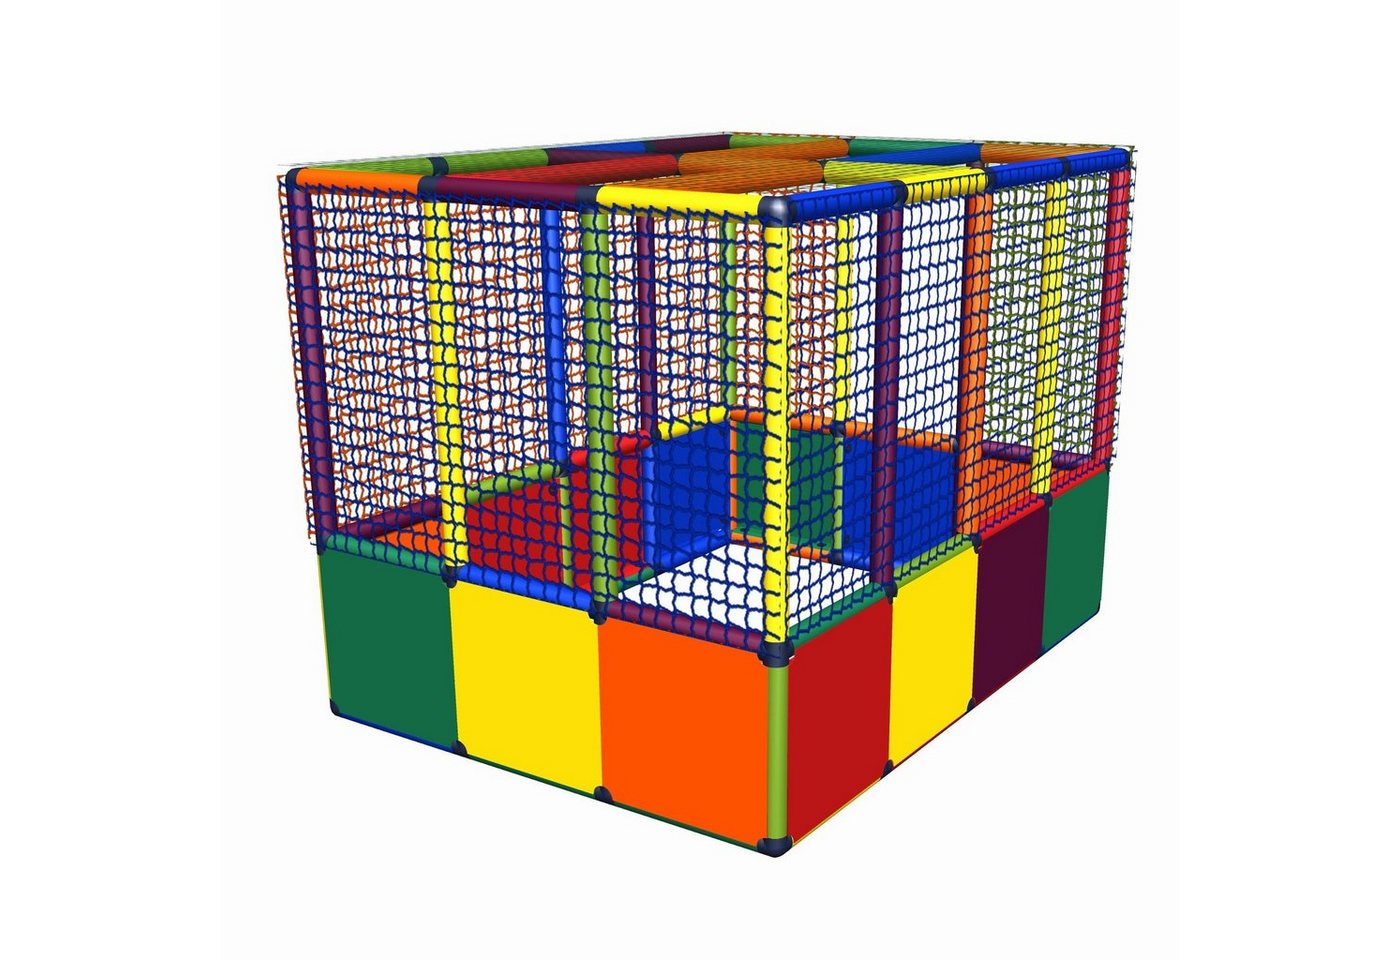 move and stic Bällebad BALLCENTER Kugelbad Ballebad ohne Boden Bällepool, (komplettes Spielset ohne Bälle), erweiterbar, umbaubar, Made in Germany von move and stic